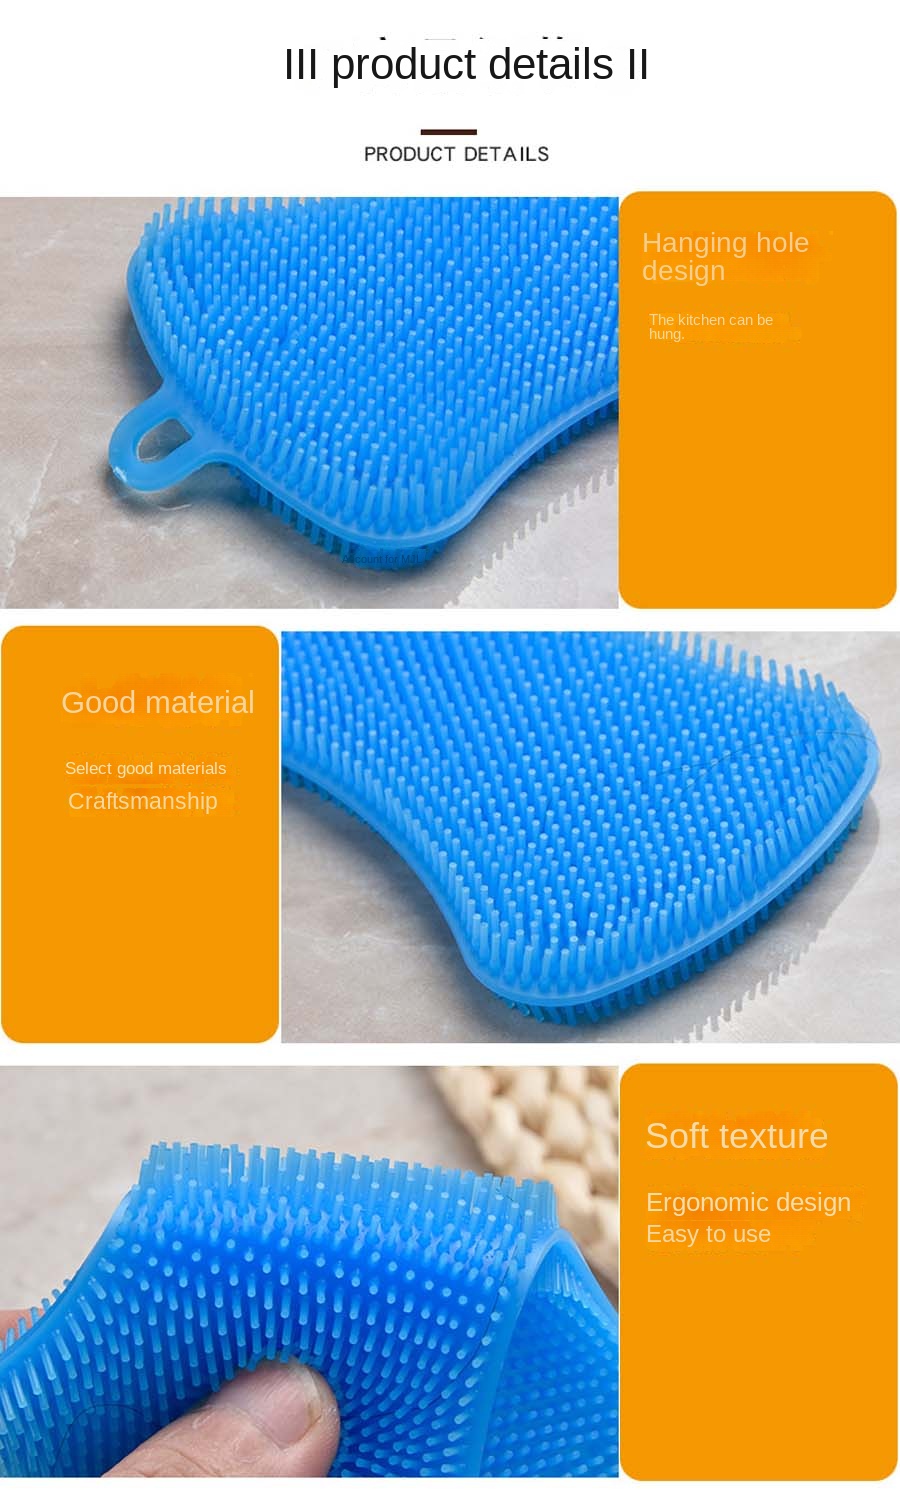 Silicone Sponge Dish Sponges, Sponges For Cleaning Dishes, Kitchen Gadgets,  3 Scrub Sponges For Dishes Kitchen Sponges Scrubber Brush Household Suppli